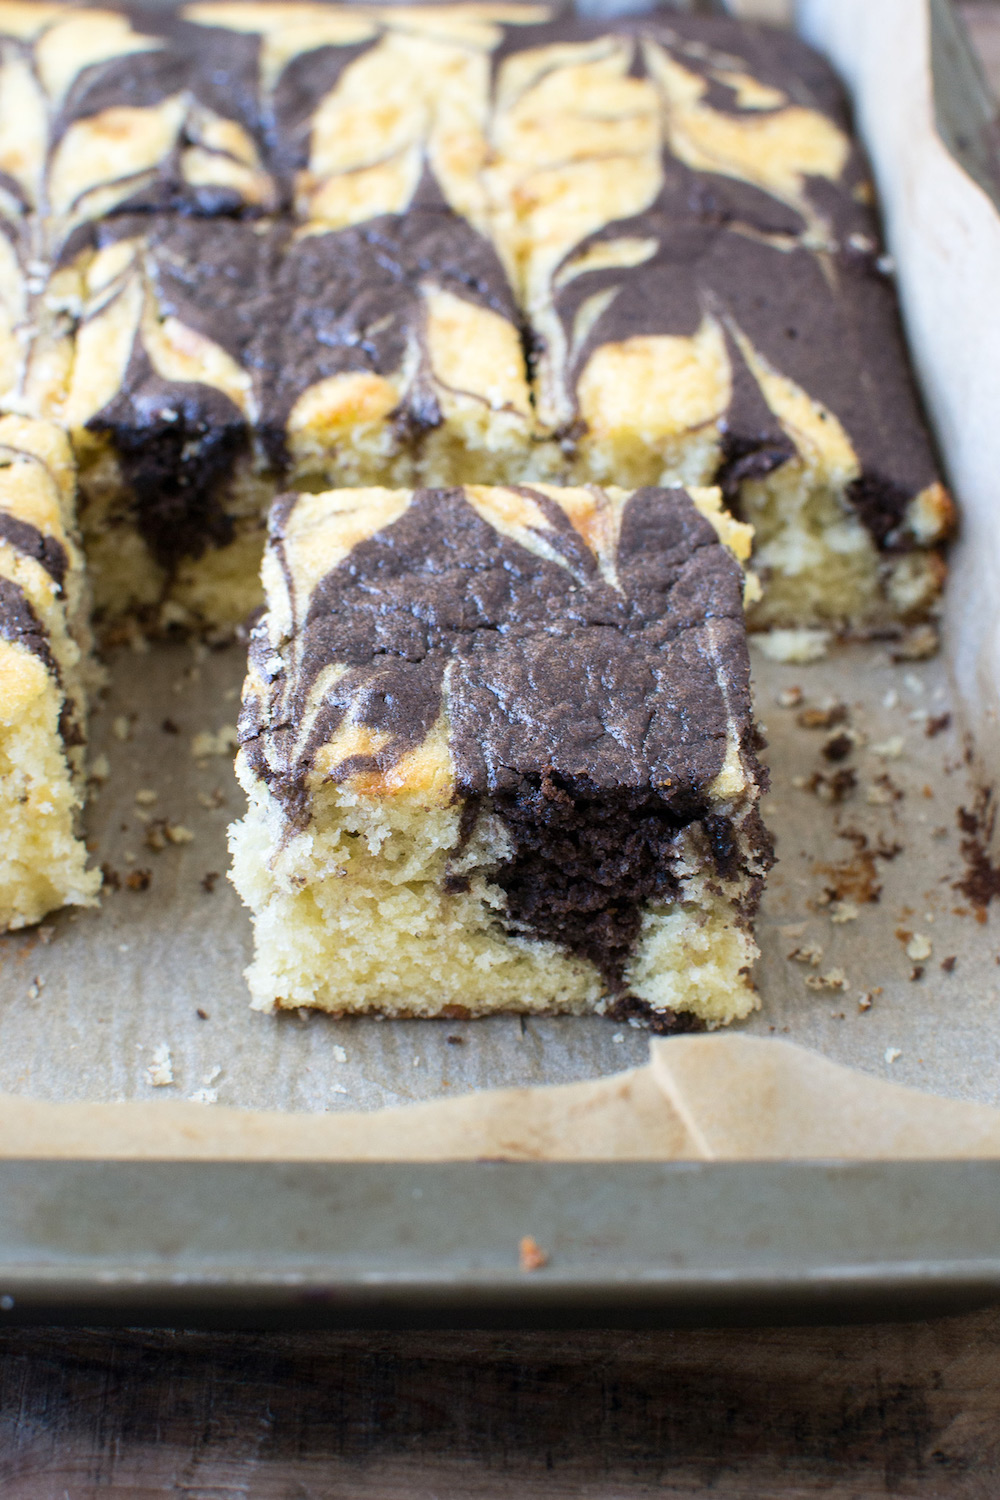 Recipes for your sheetcaking weekend: Chocolate Vanilla Marble Cake at The Well Floured Kitchen